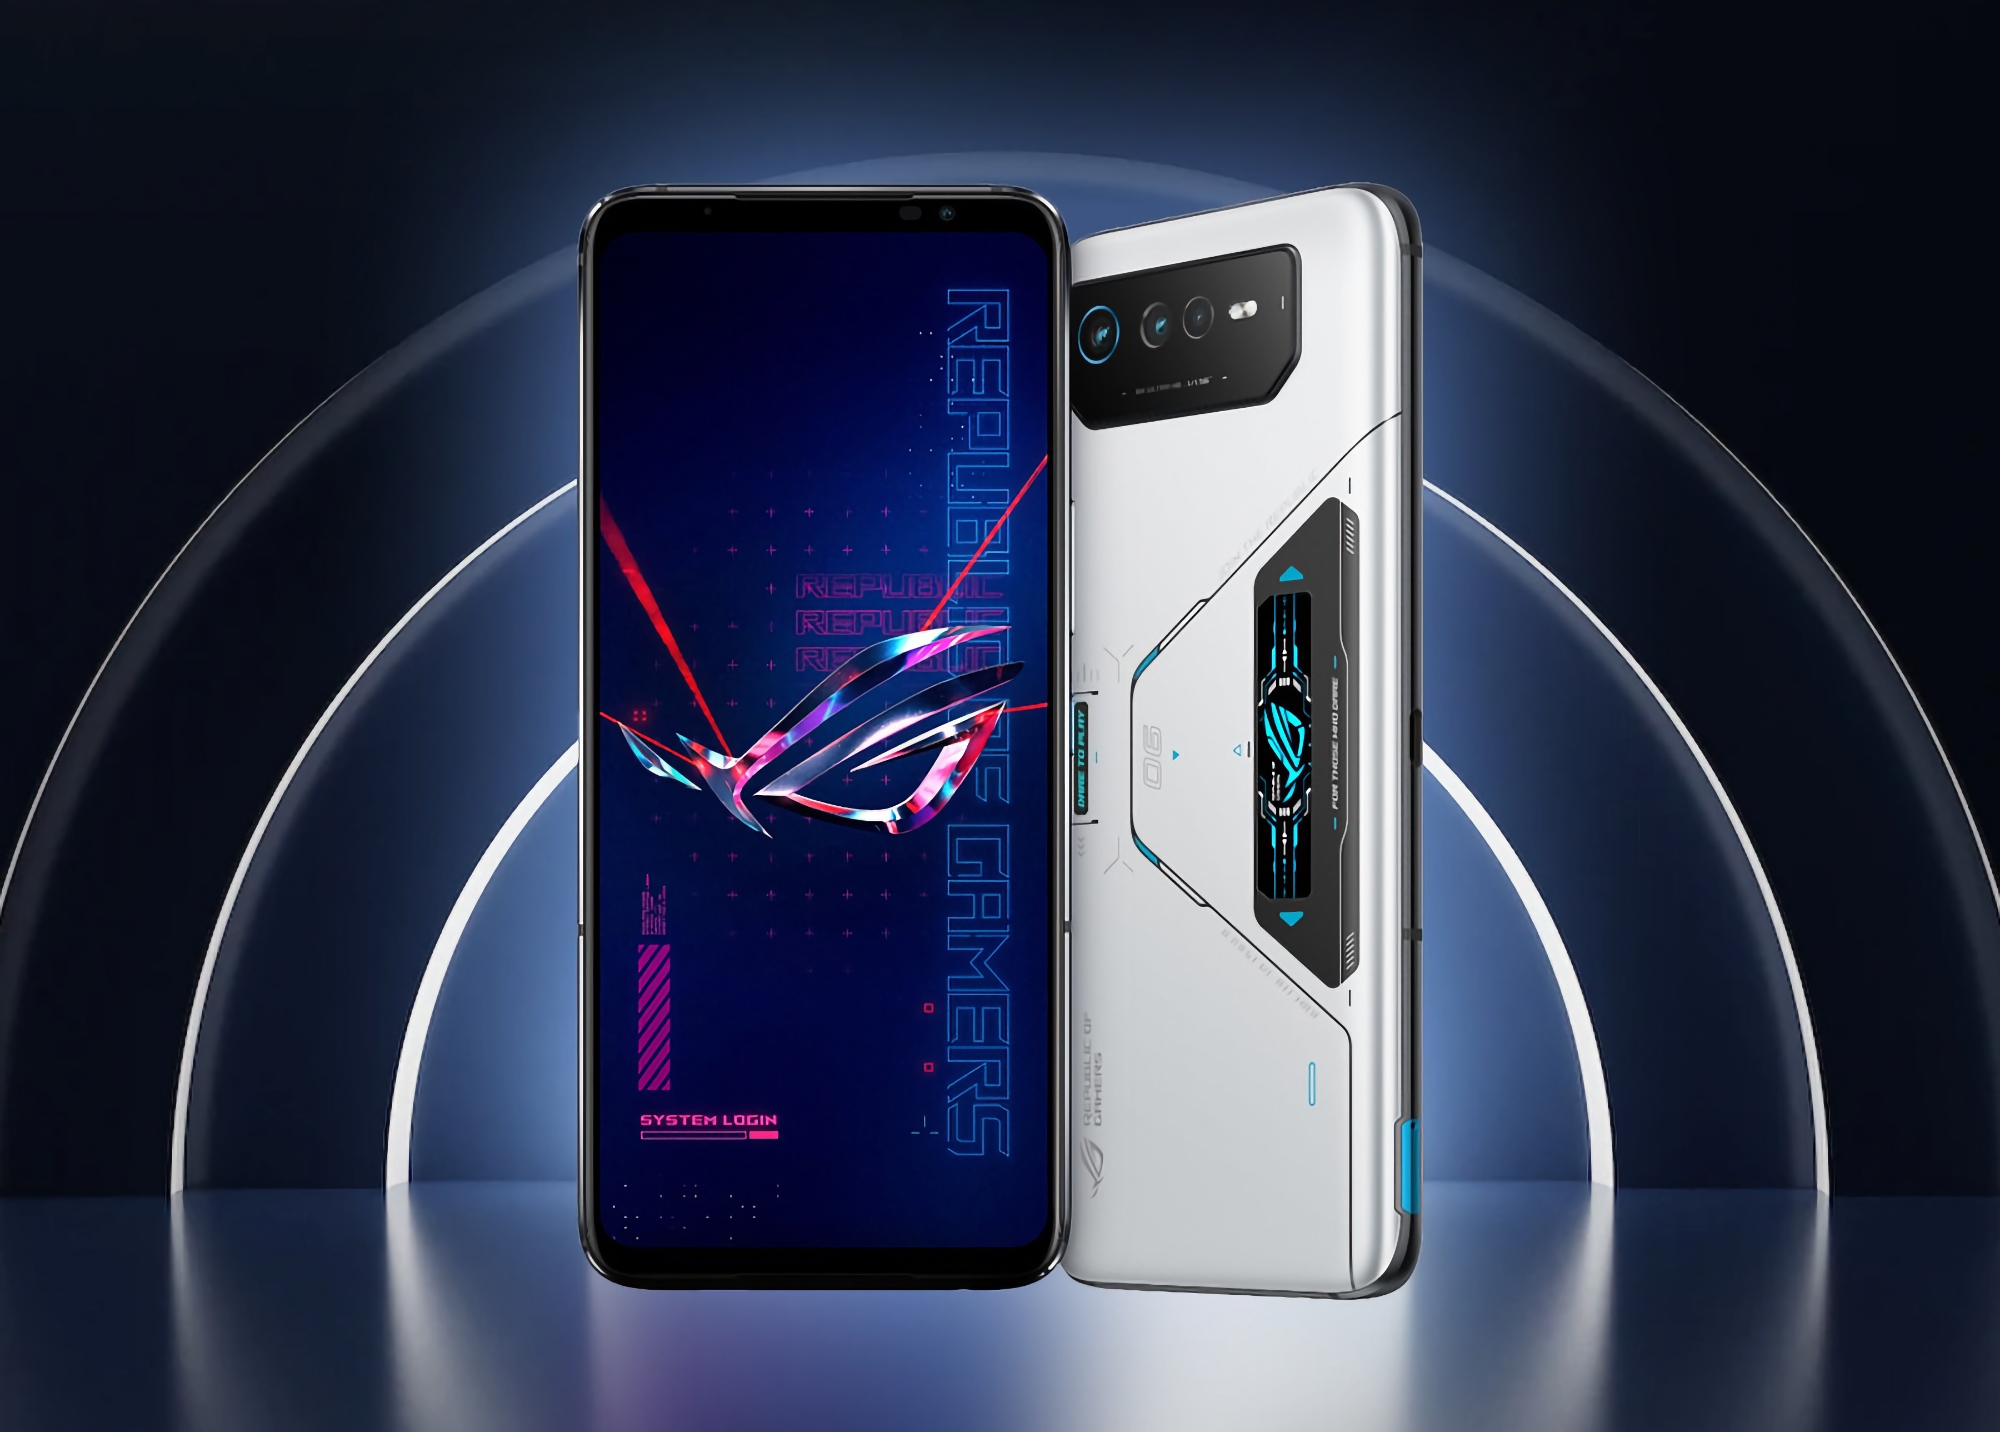 Asus ROG Phone 8 - Full phone specifications